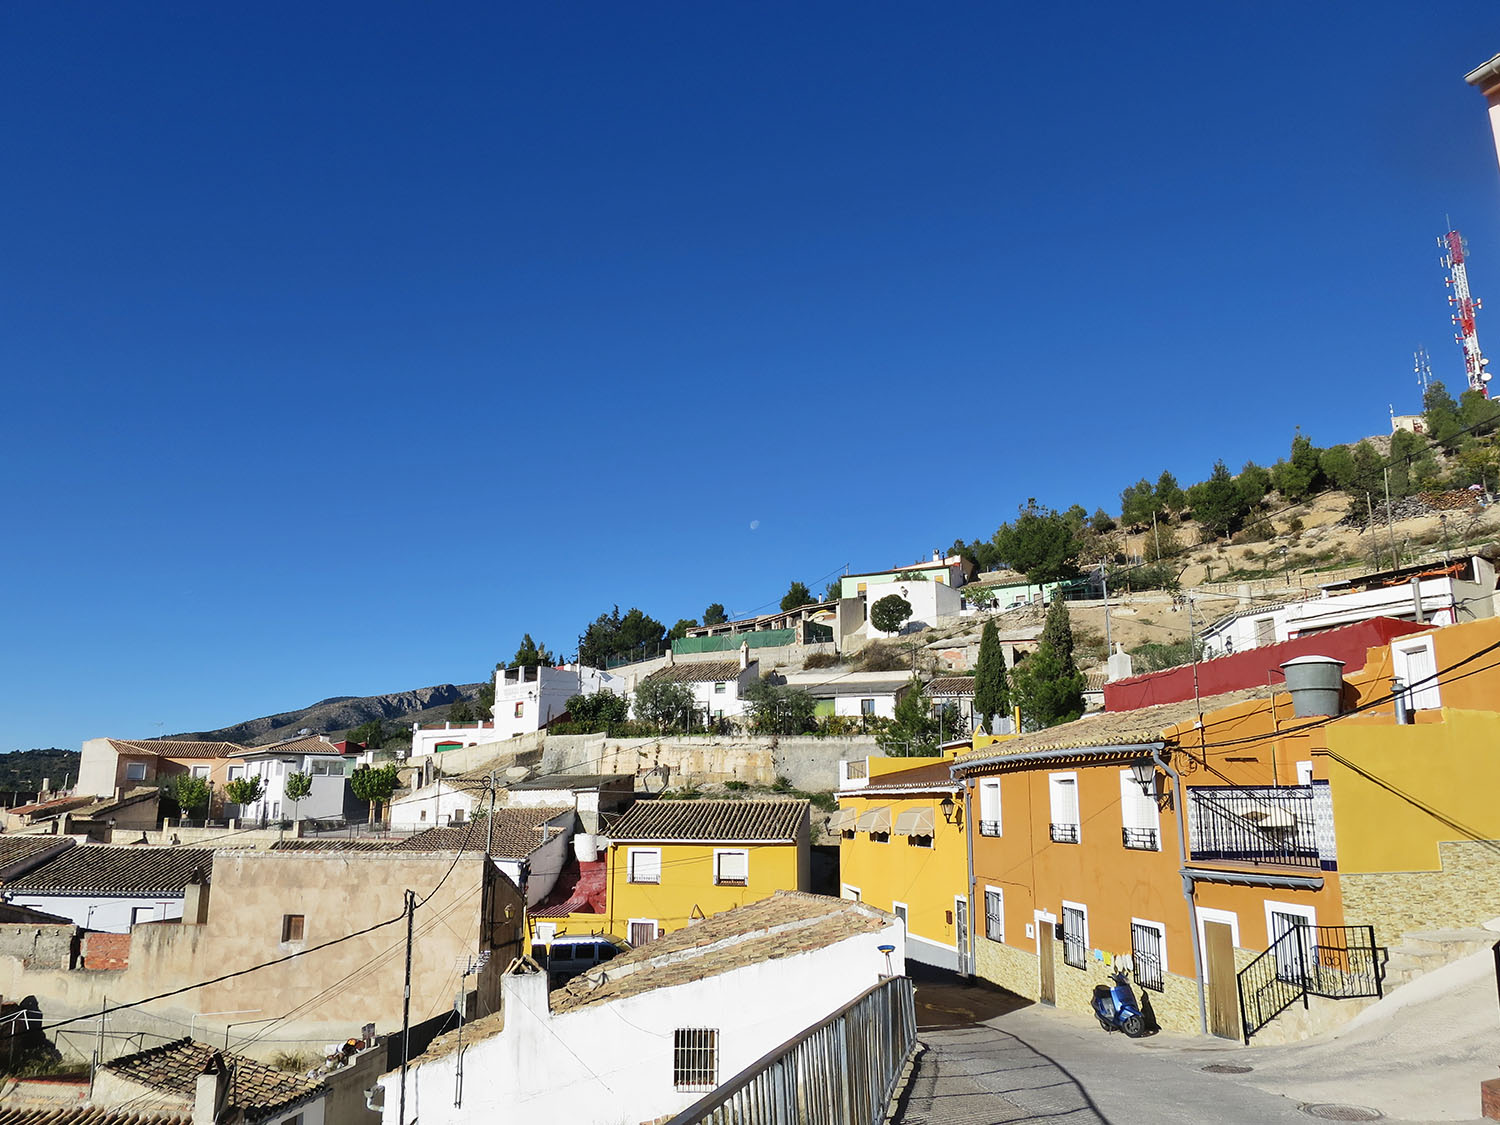 Morning view of houses on the hill in Caravaca